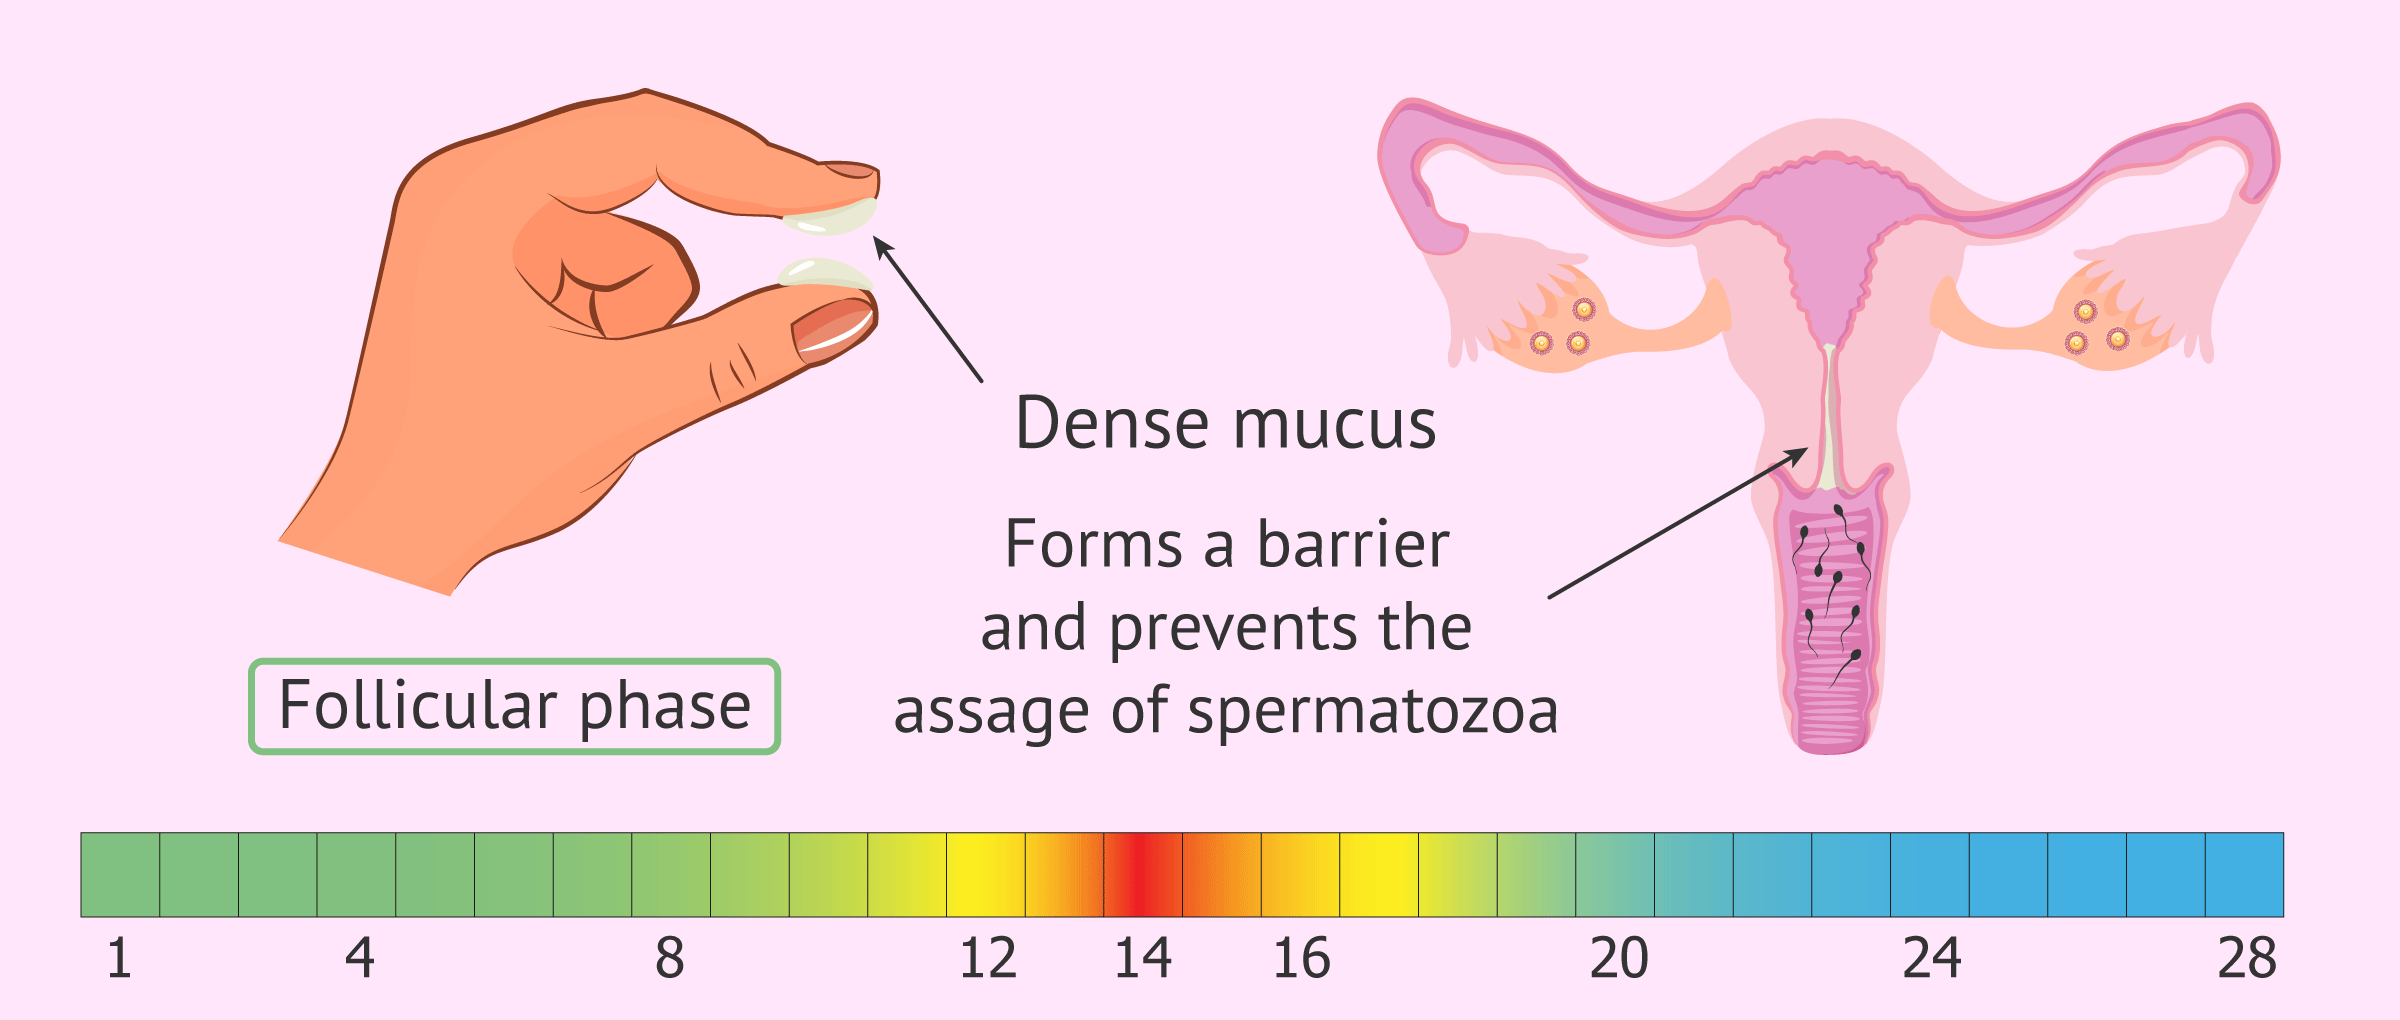 Appearance and function of cervical mucus during the follicular phase.